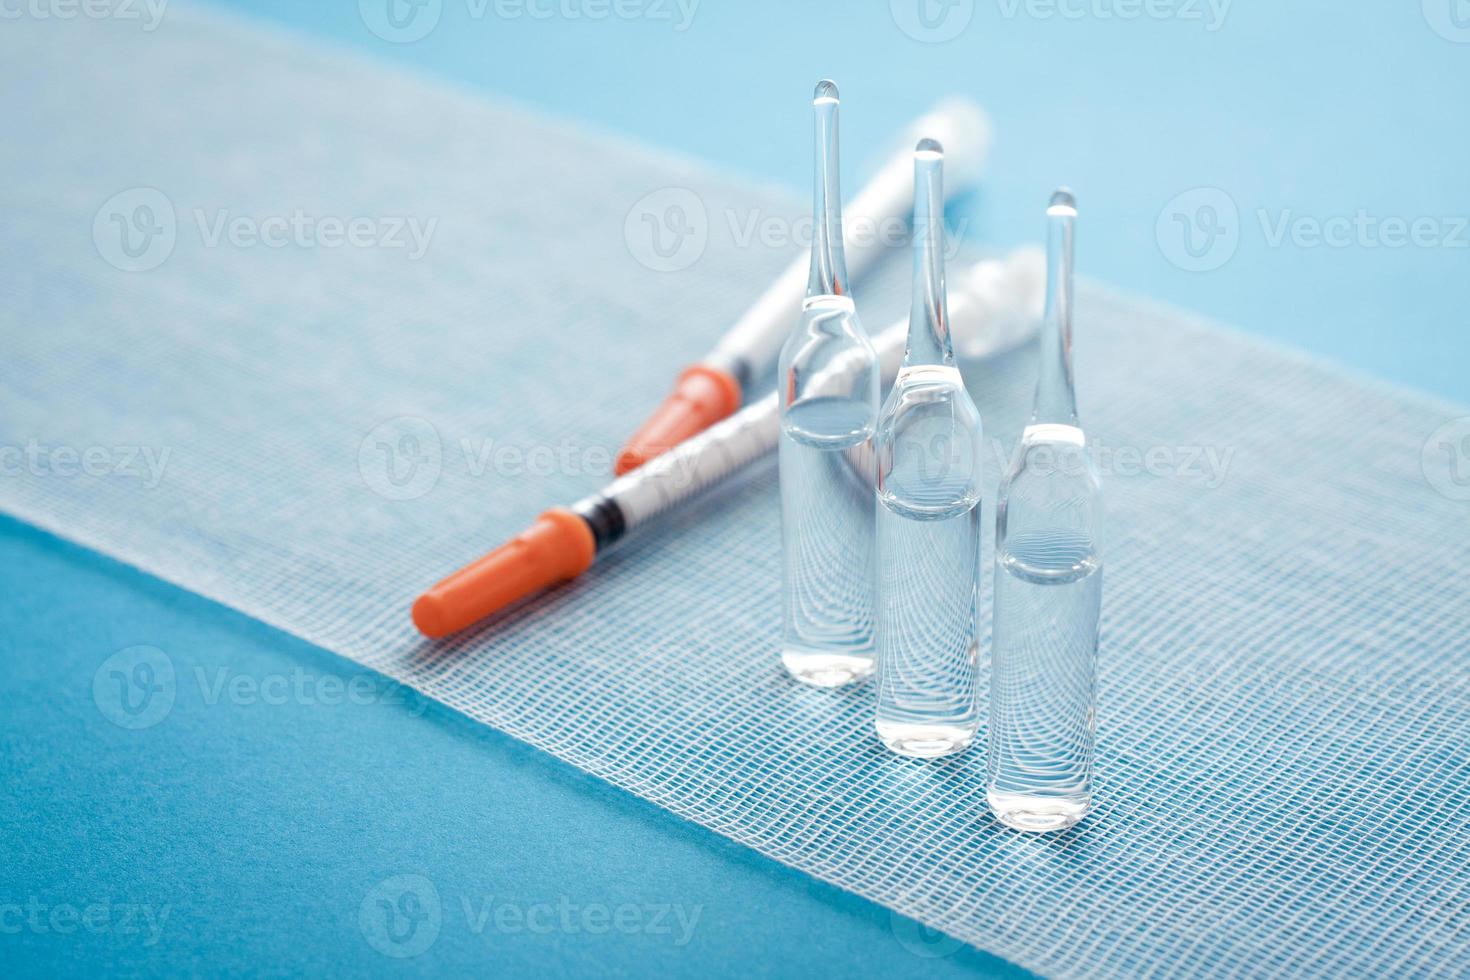 Ampules and syringes on steile bandage surface. Close up image of medical supplies. photo